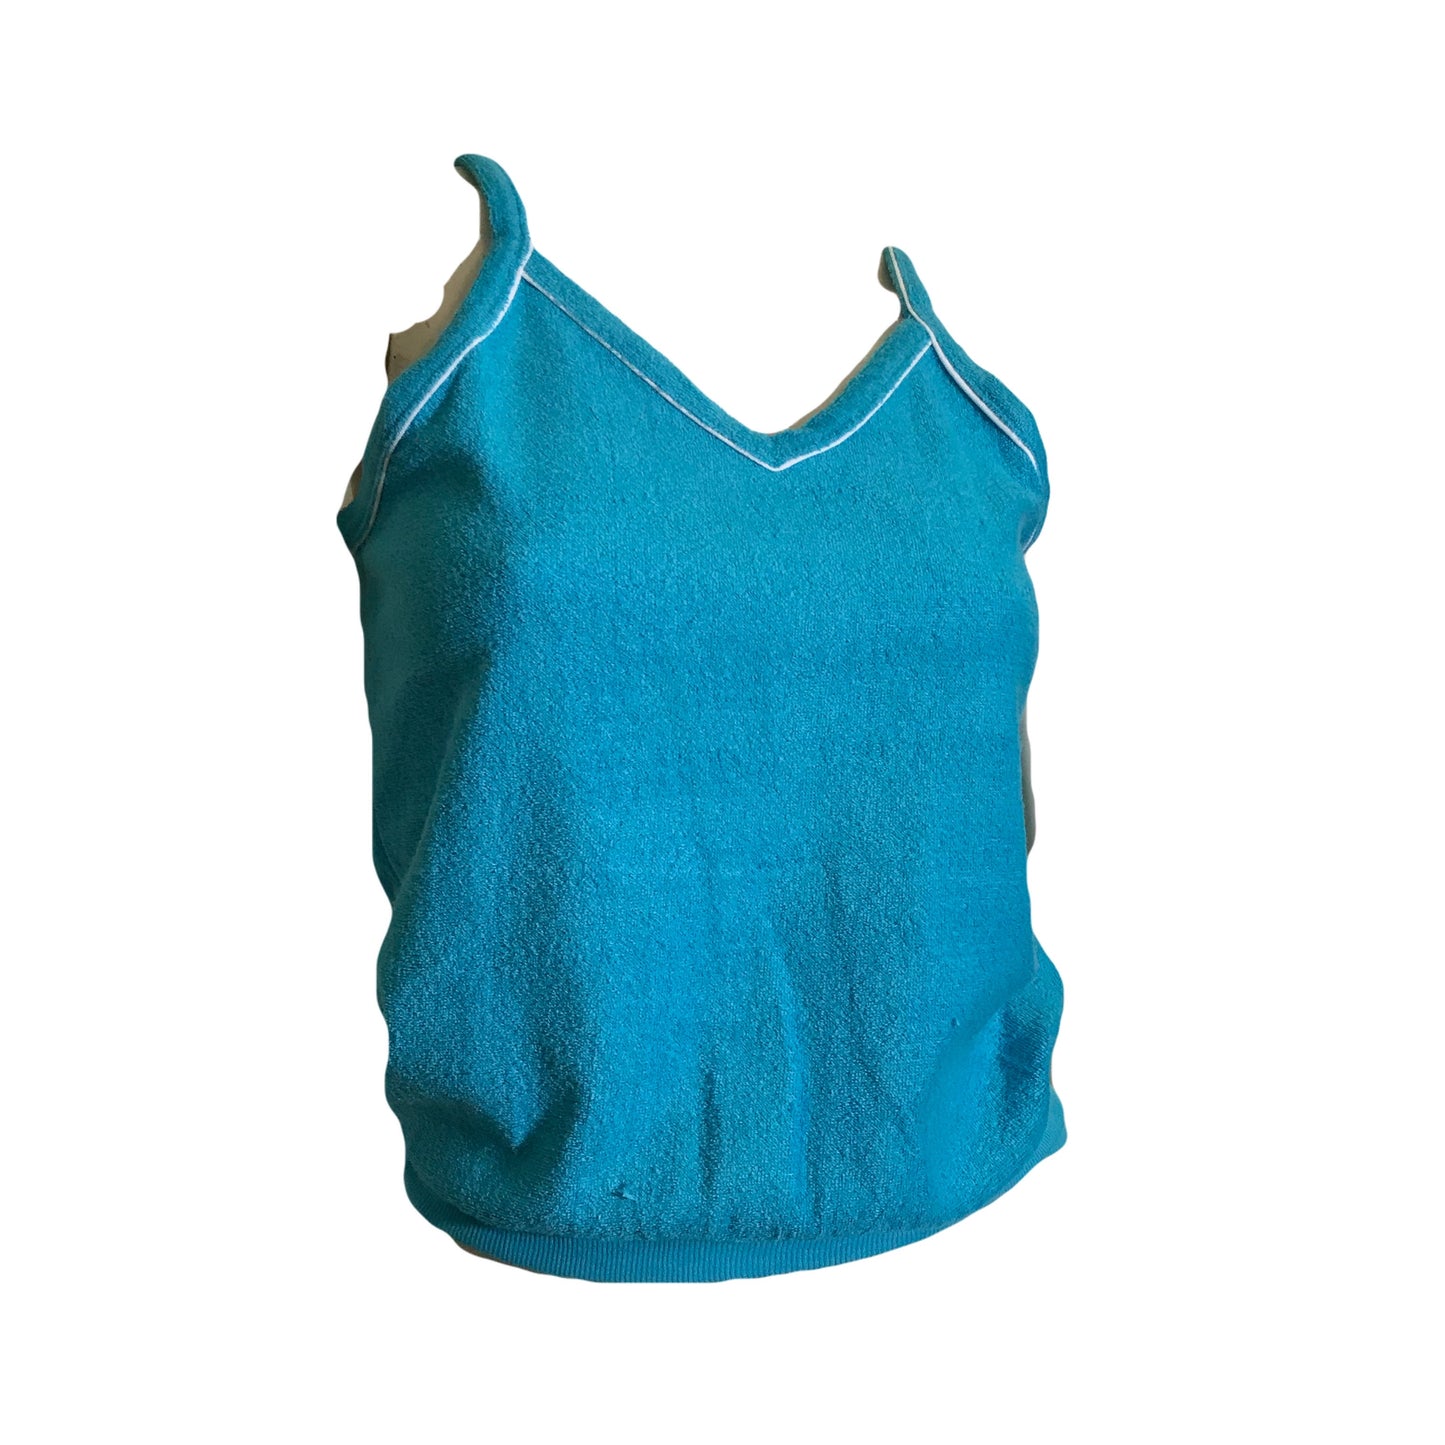 Bright Colored Terry Cloth Tank Top with White Trim circa 1970s 3 Colors Available